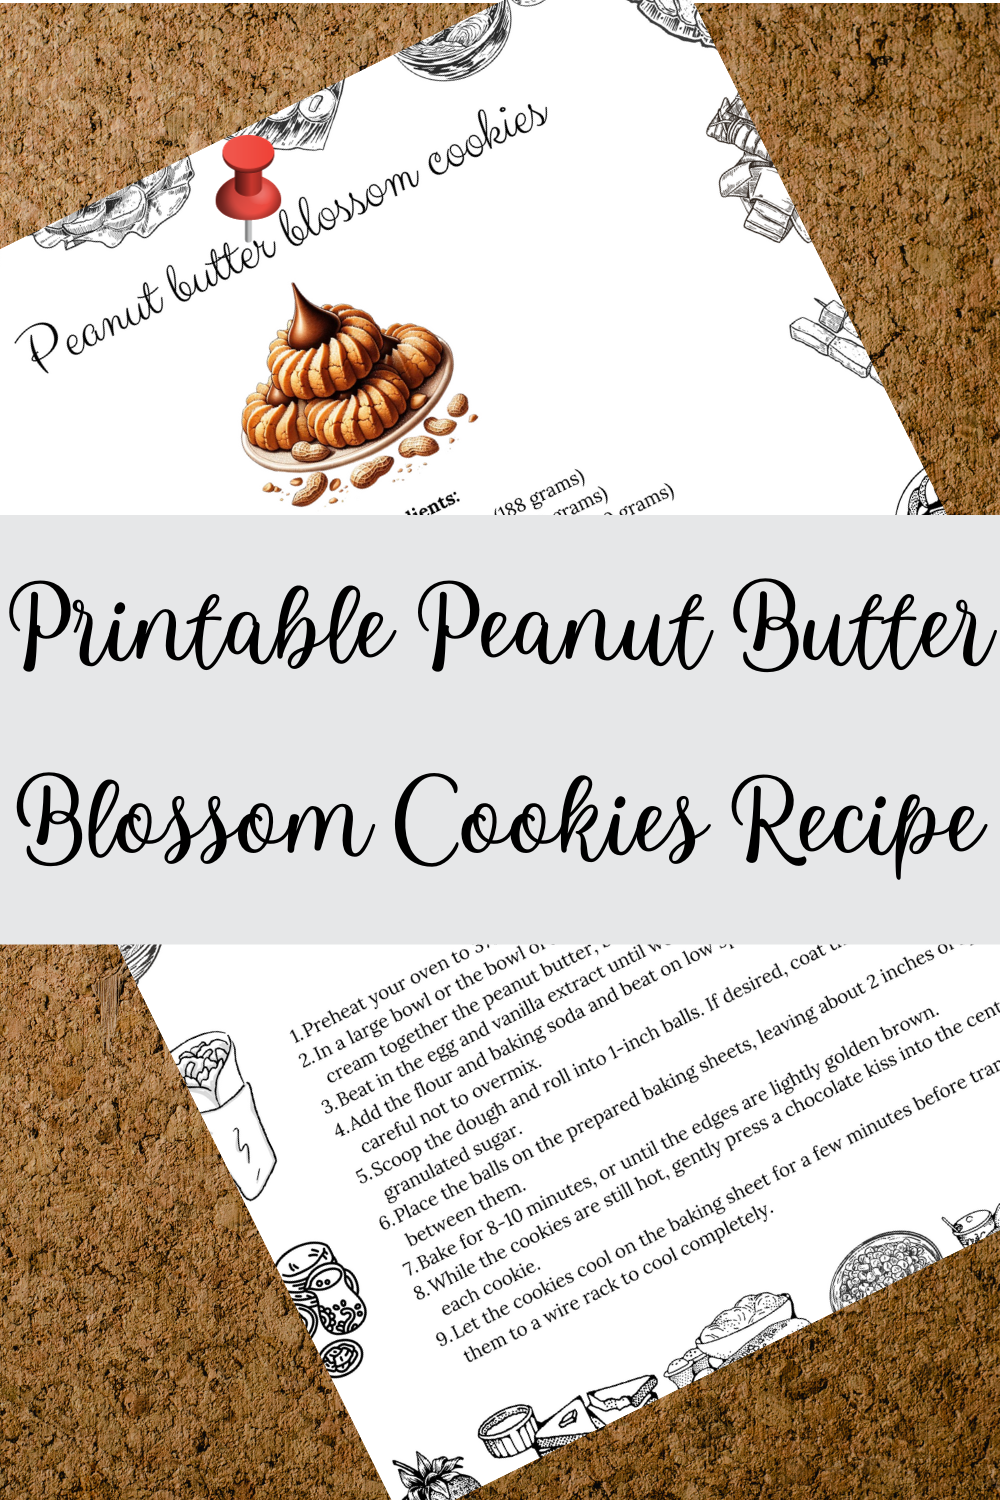 Printable Peanut Butter Blossom Cookies Recipe